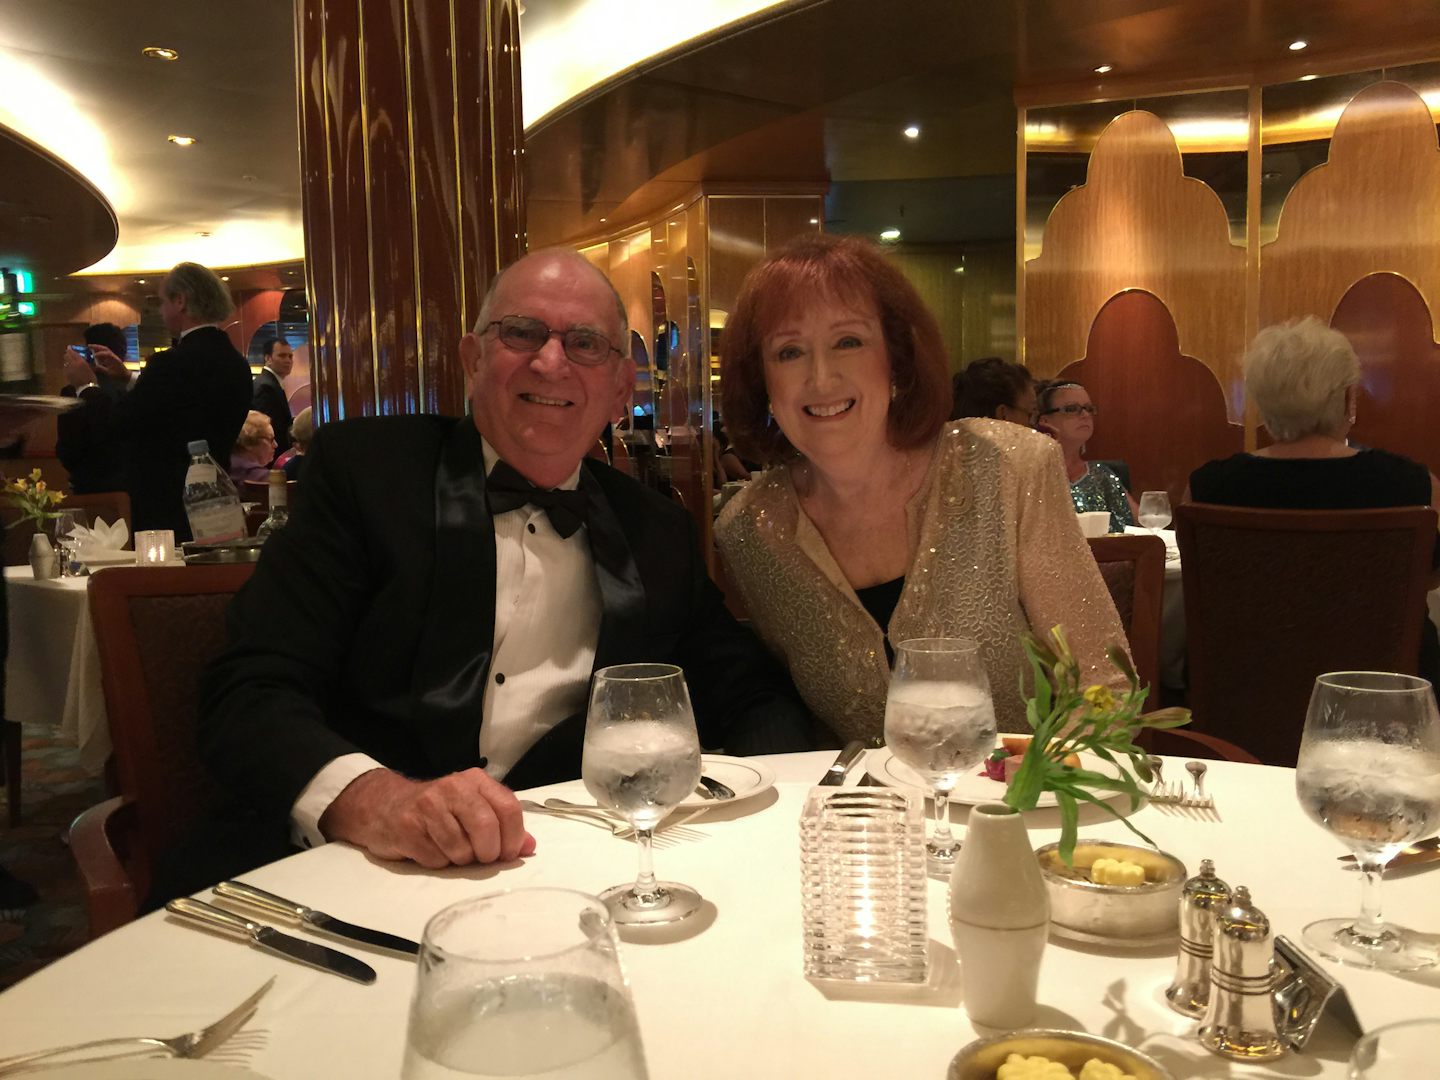 Dining in the Britannia Restaurant was very good.We sat at a table for 6 and cunard matched us very well to our other table guests.Formal evening we were required to wear a tux and informal nights a suit or at least a tie and jacket .
Waiters were great and food excellent